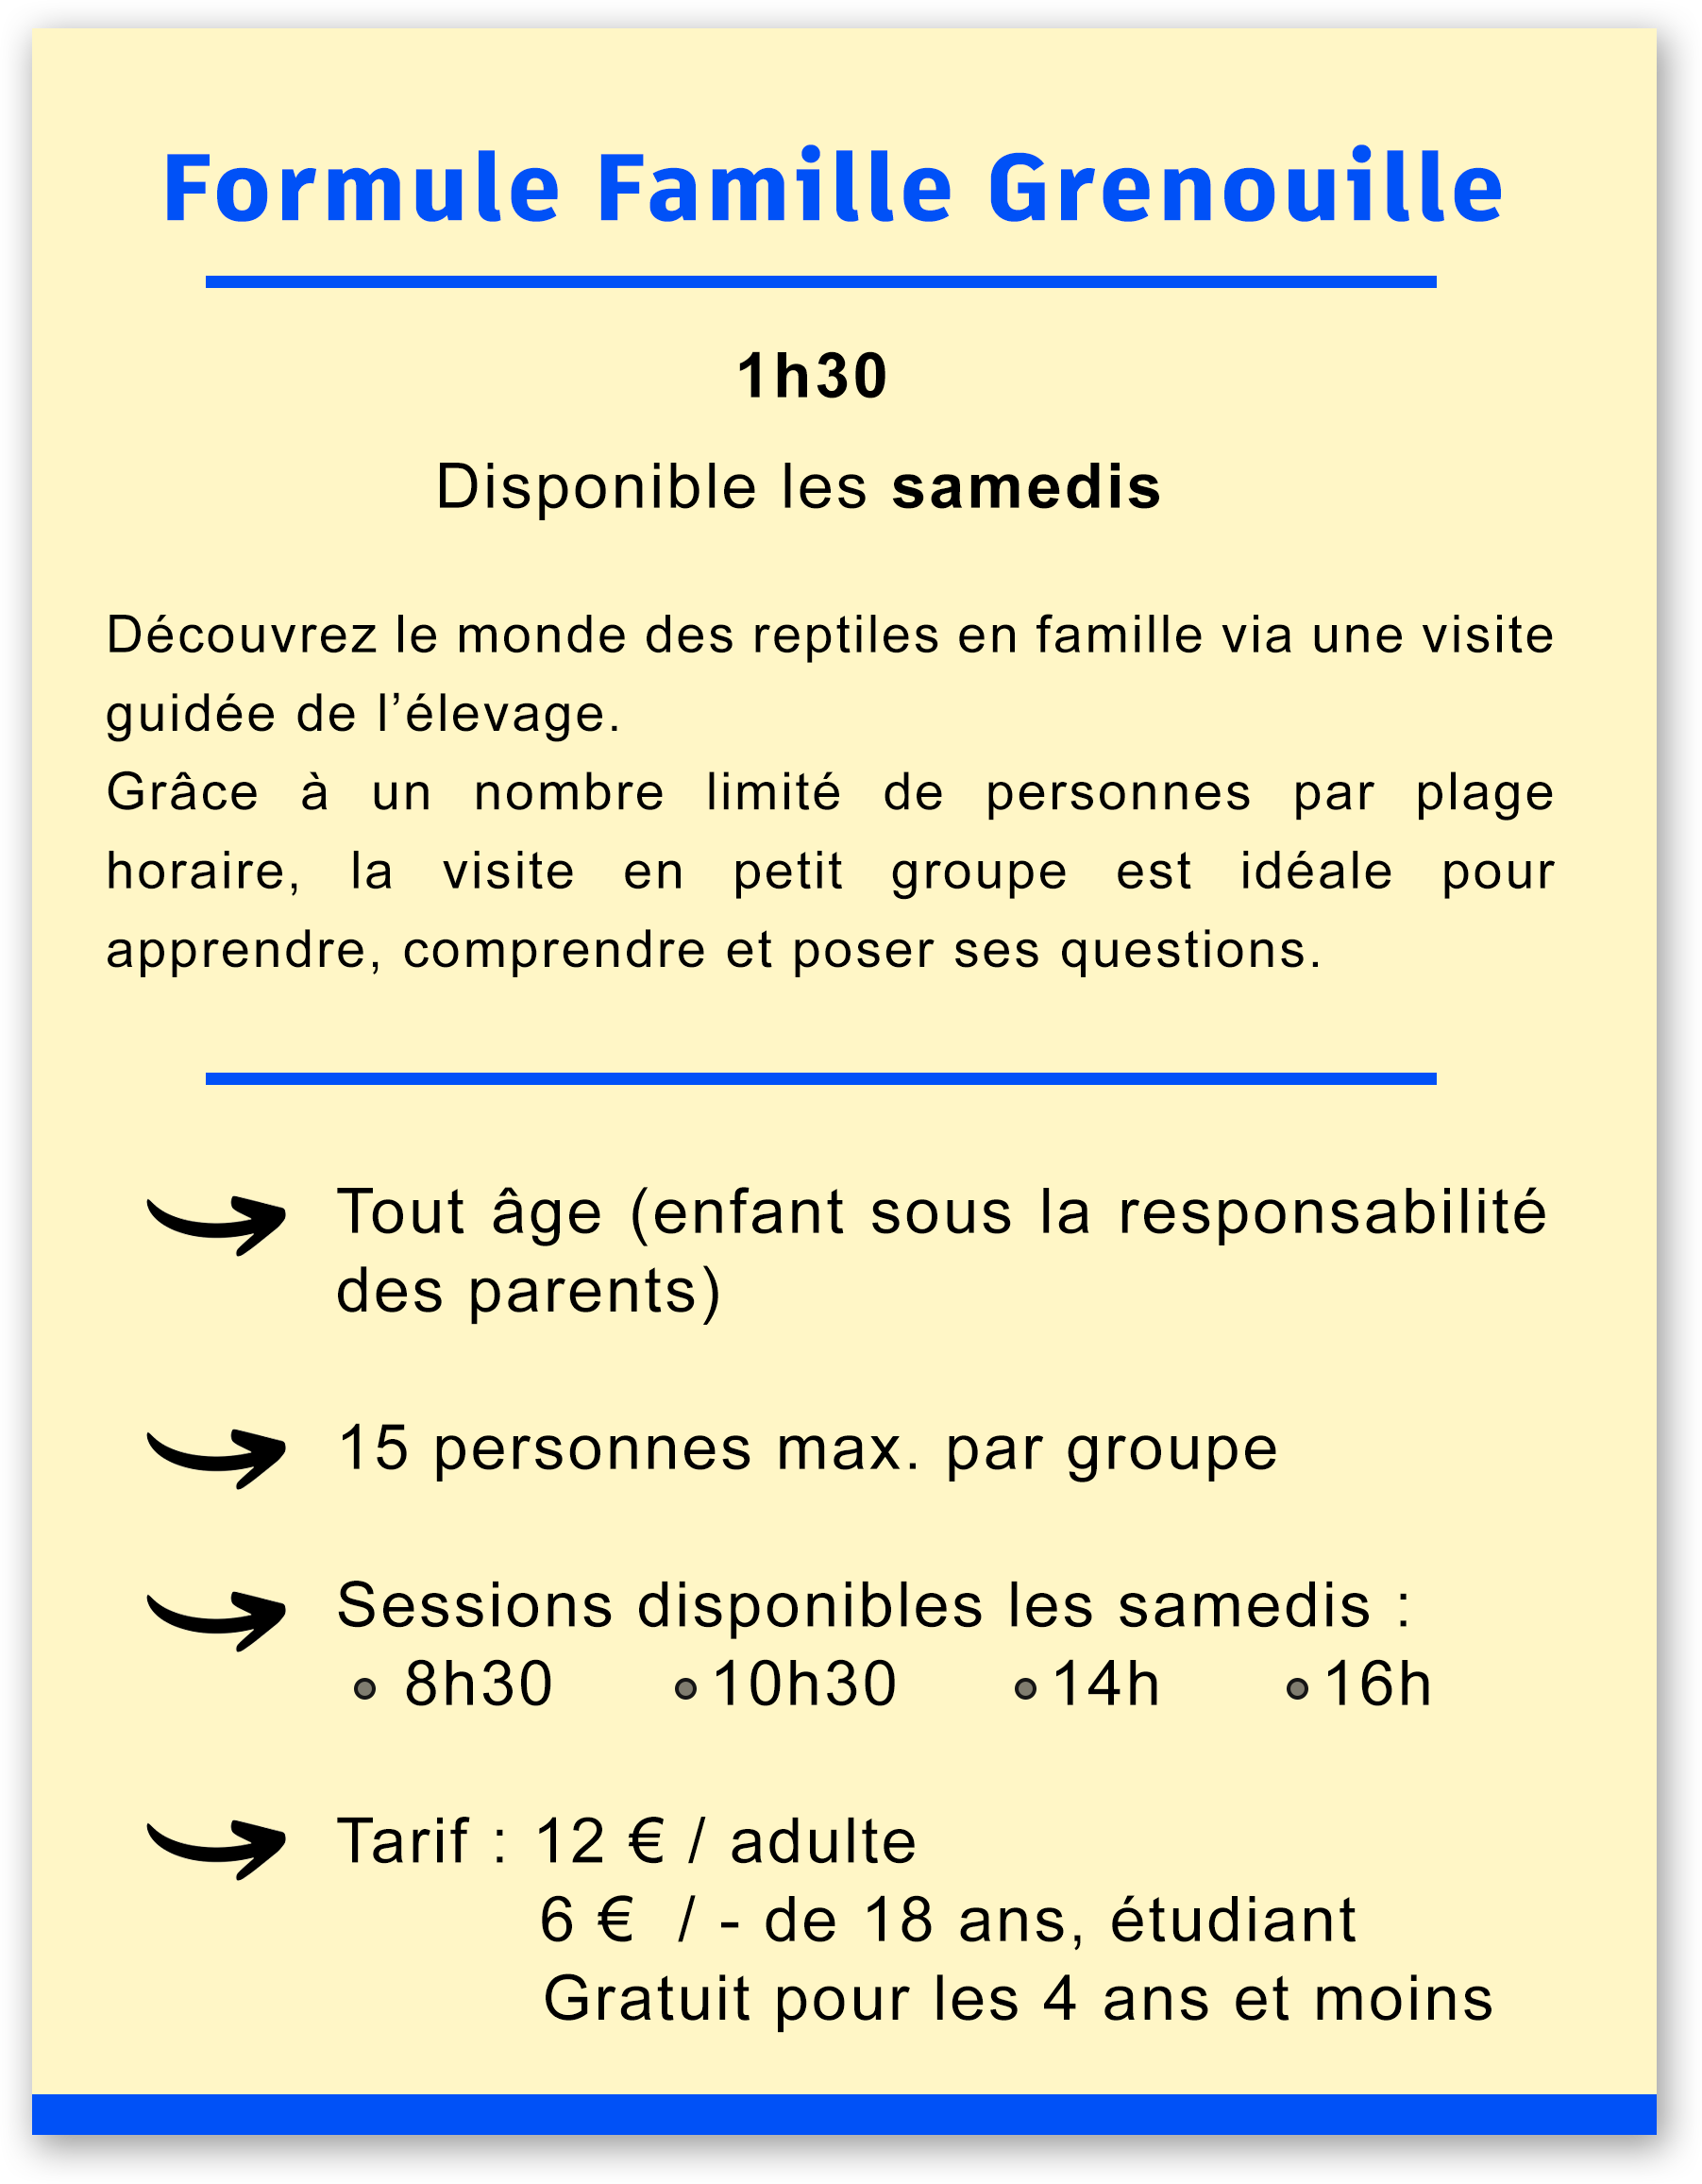 formule famille grenouille-holding.png